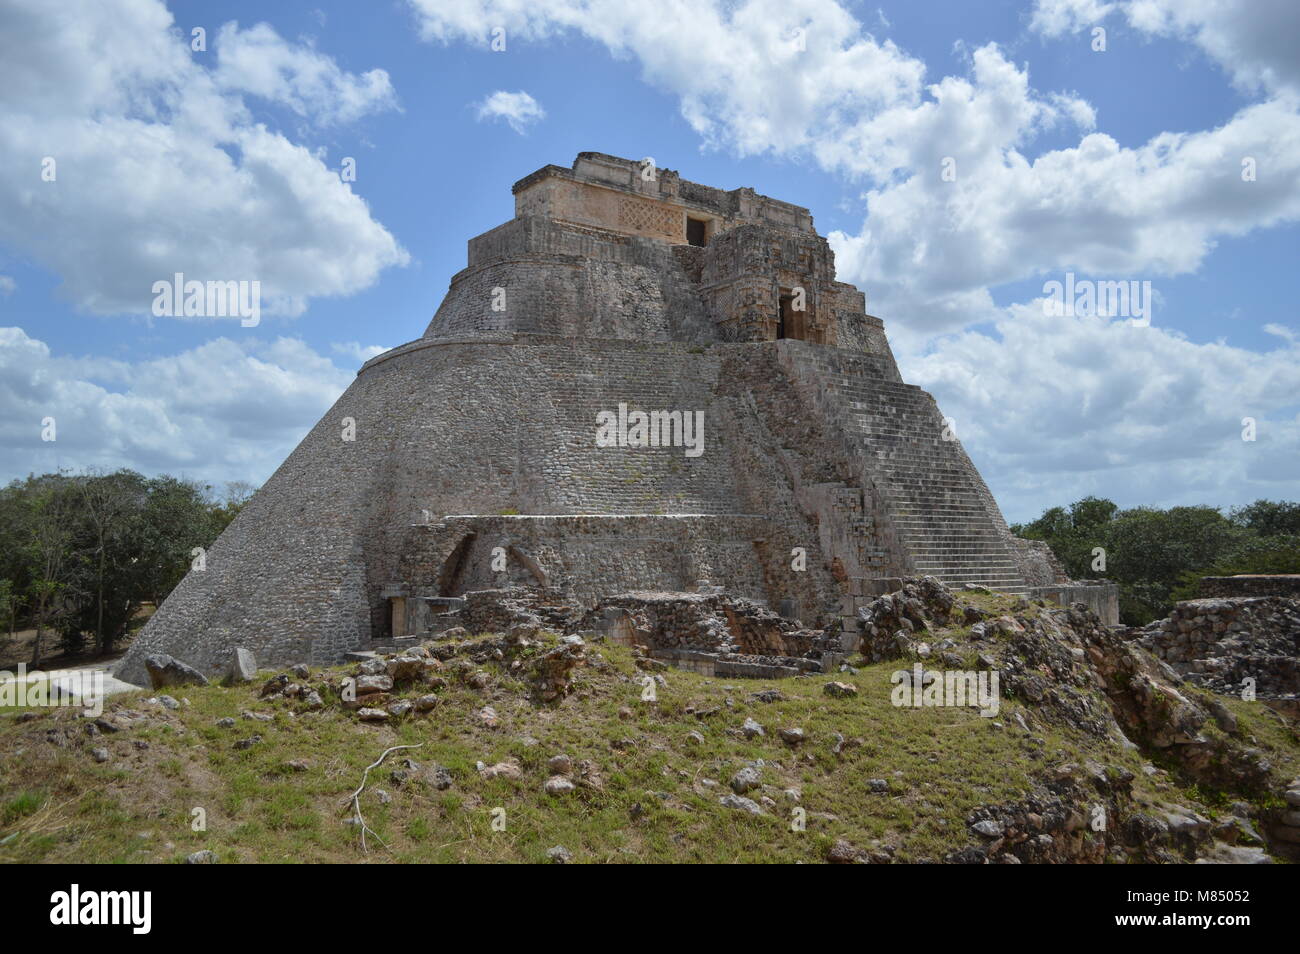 A view of the Pyramid of the Magician at Uxmal in Mexico Stock Photo